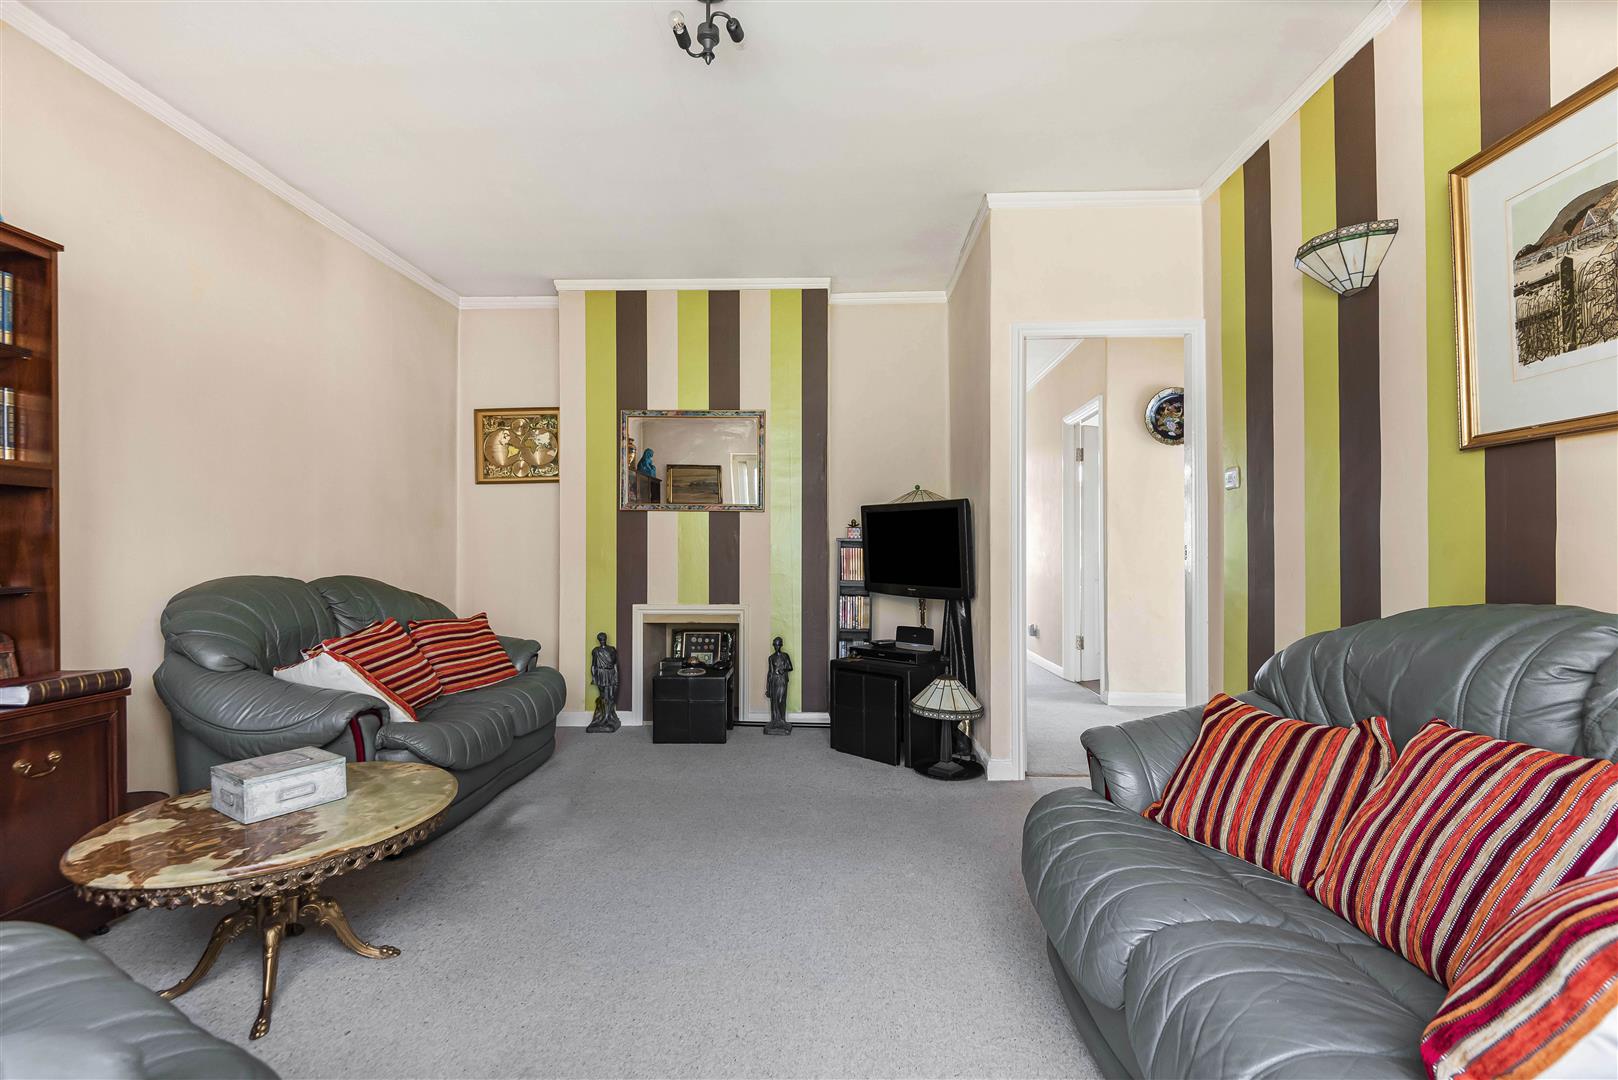 Woodlands Avenue Woodley house for sale in Reading